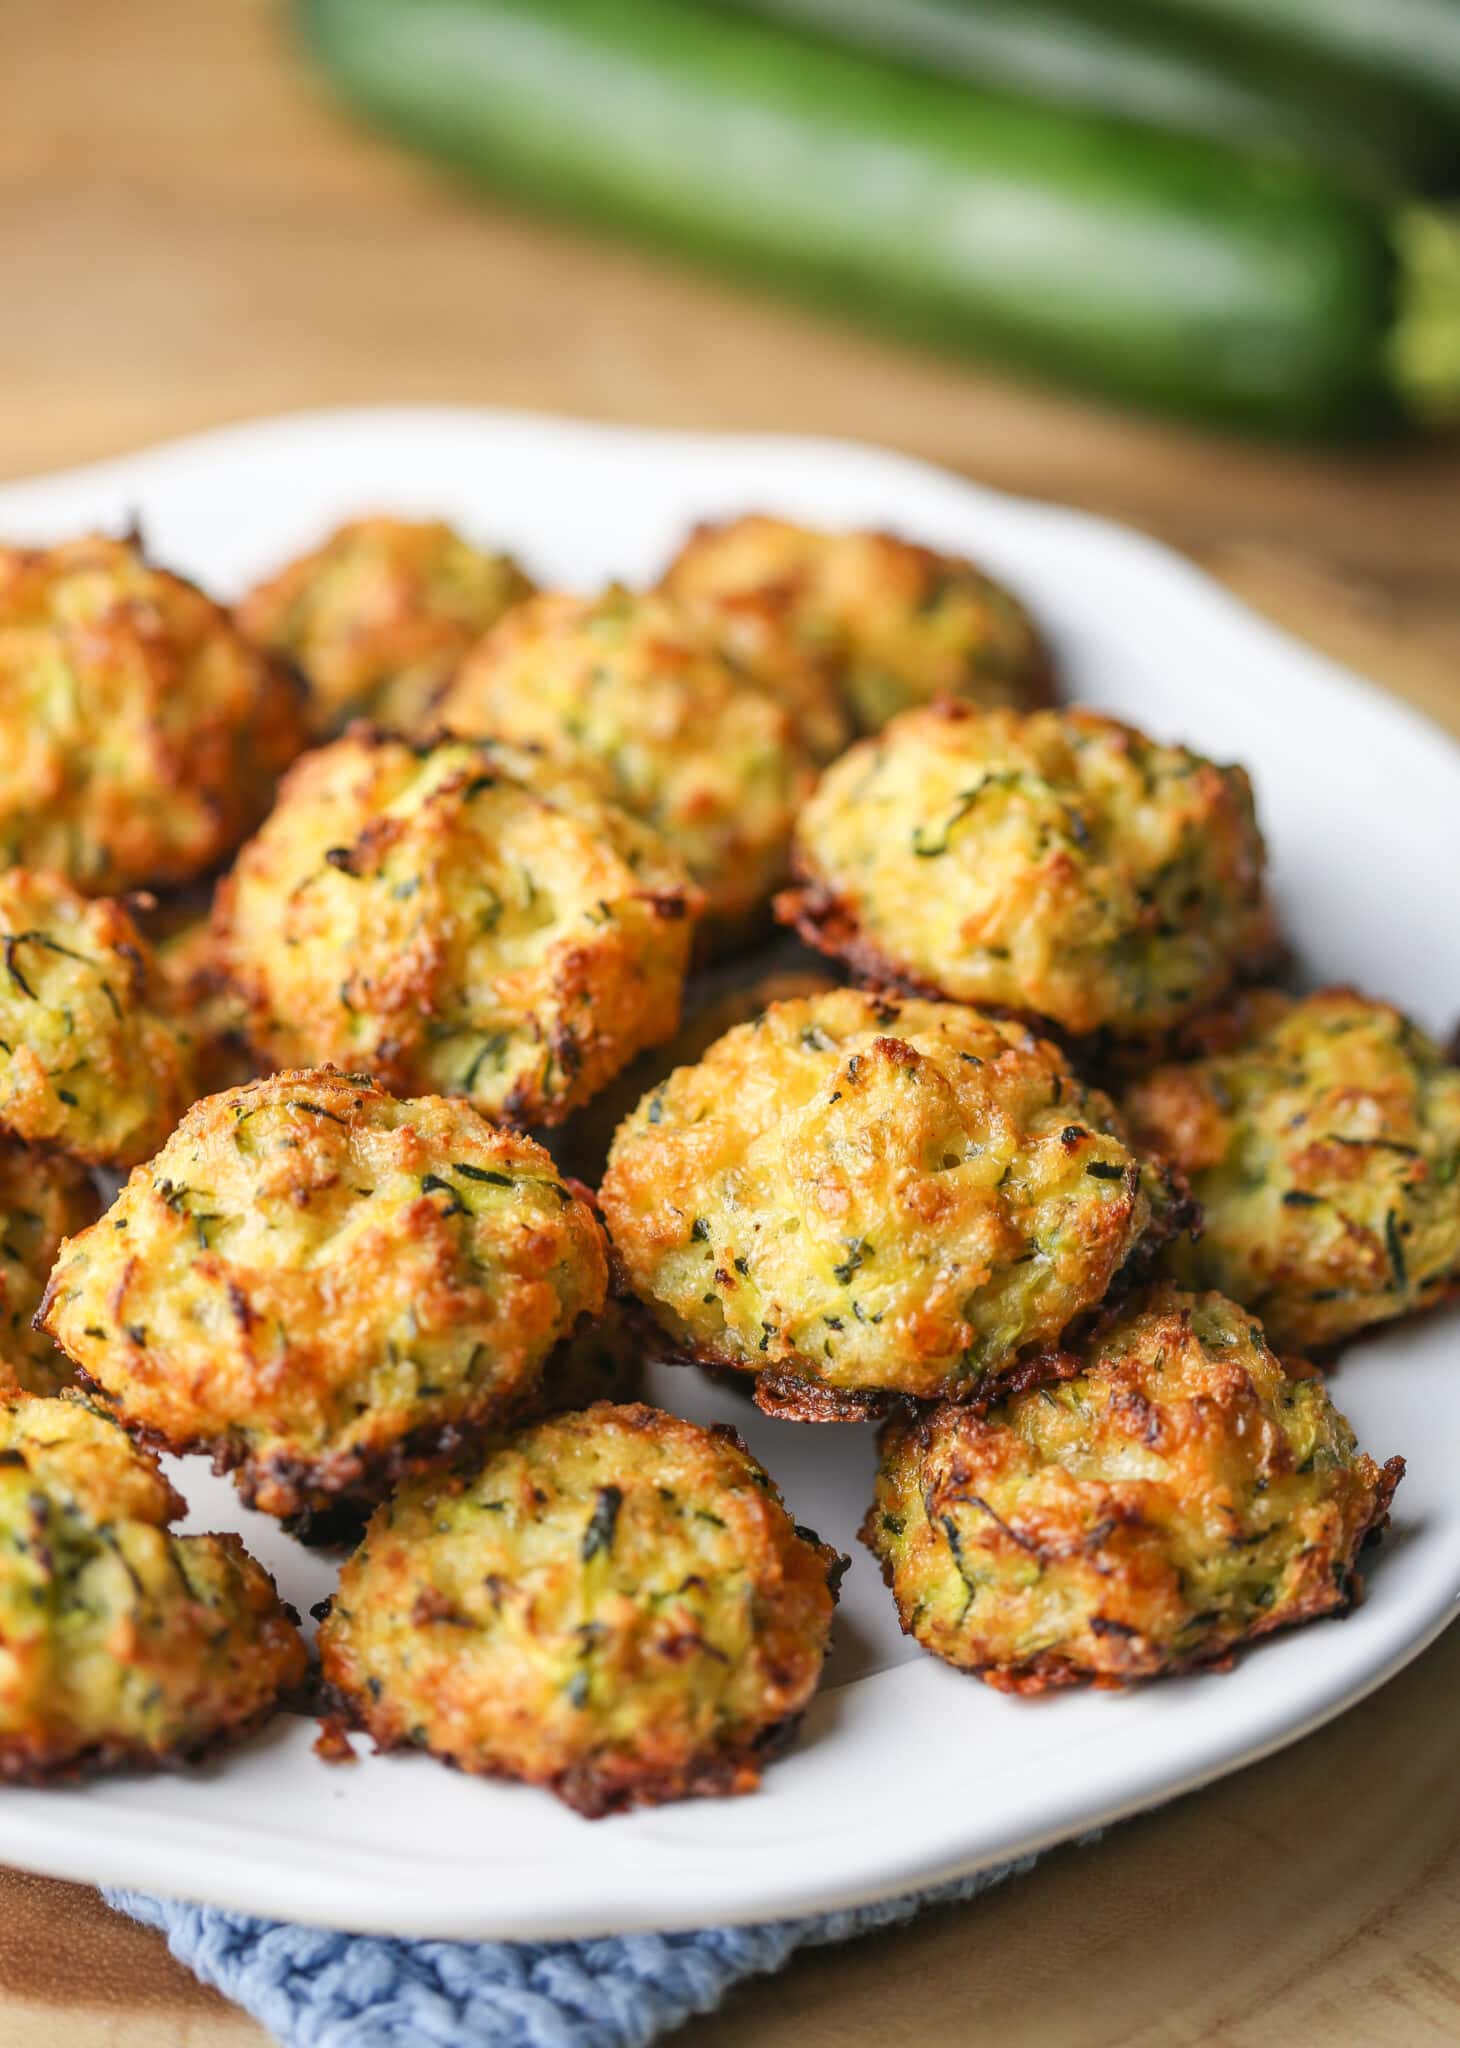 Cheesy Baked Zucchini Bites - Yay! For Food